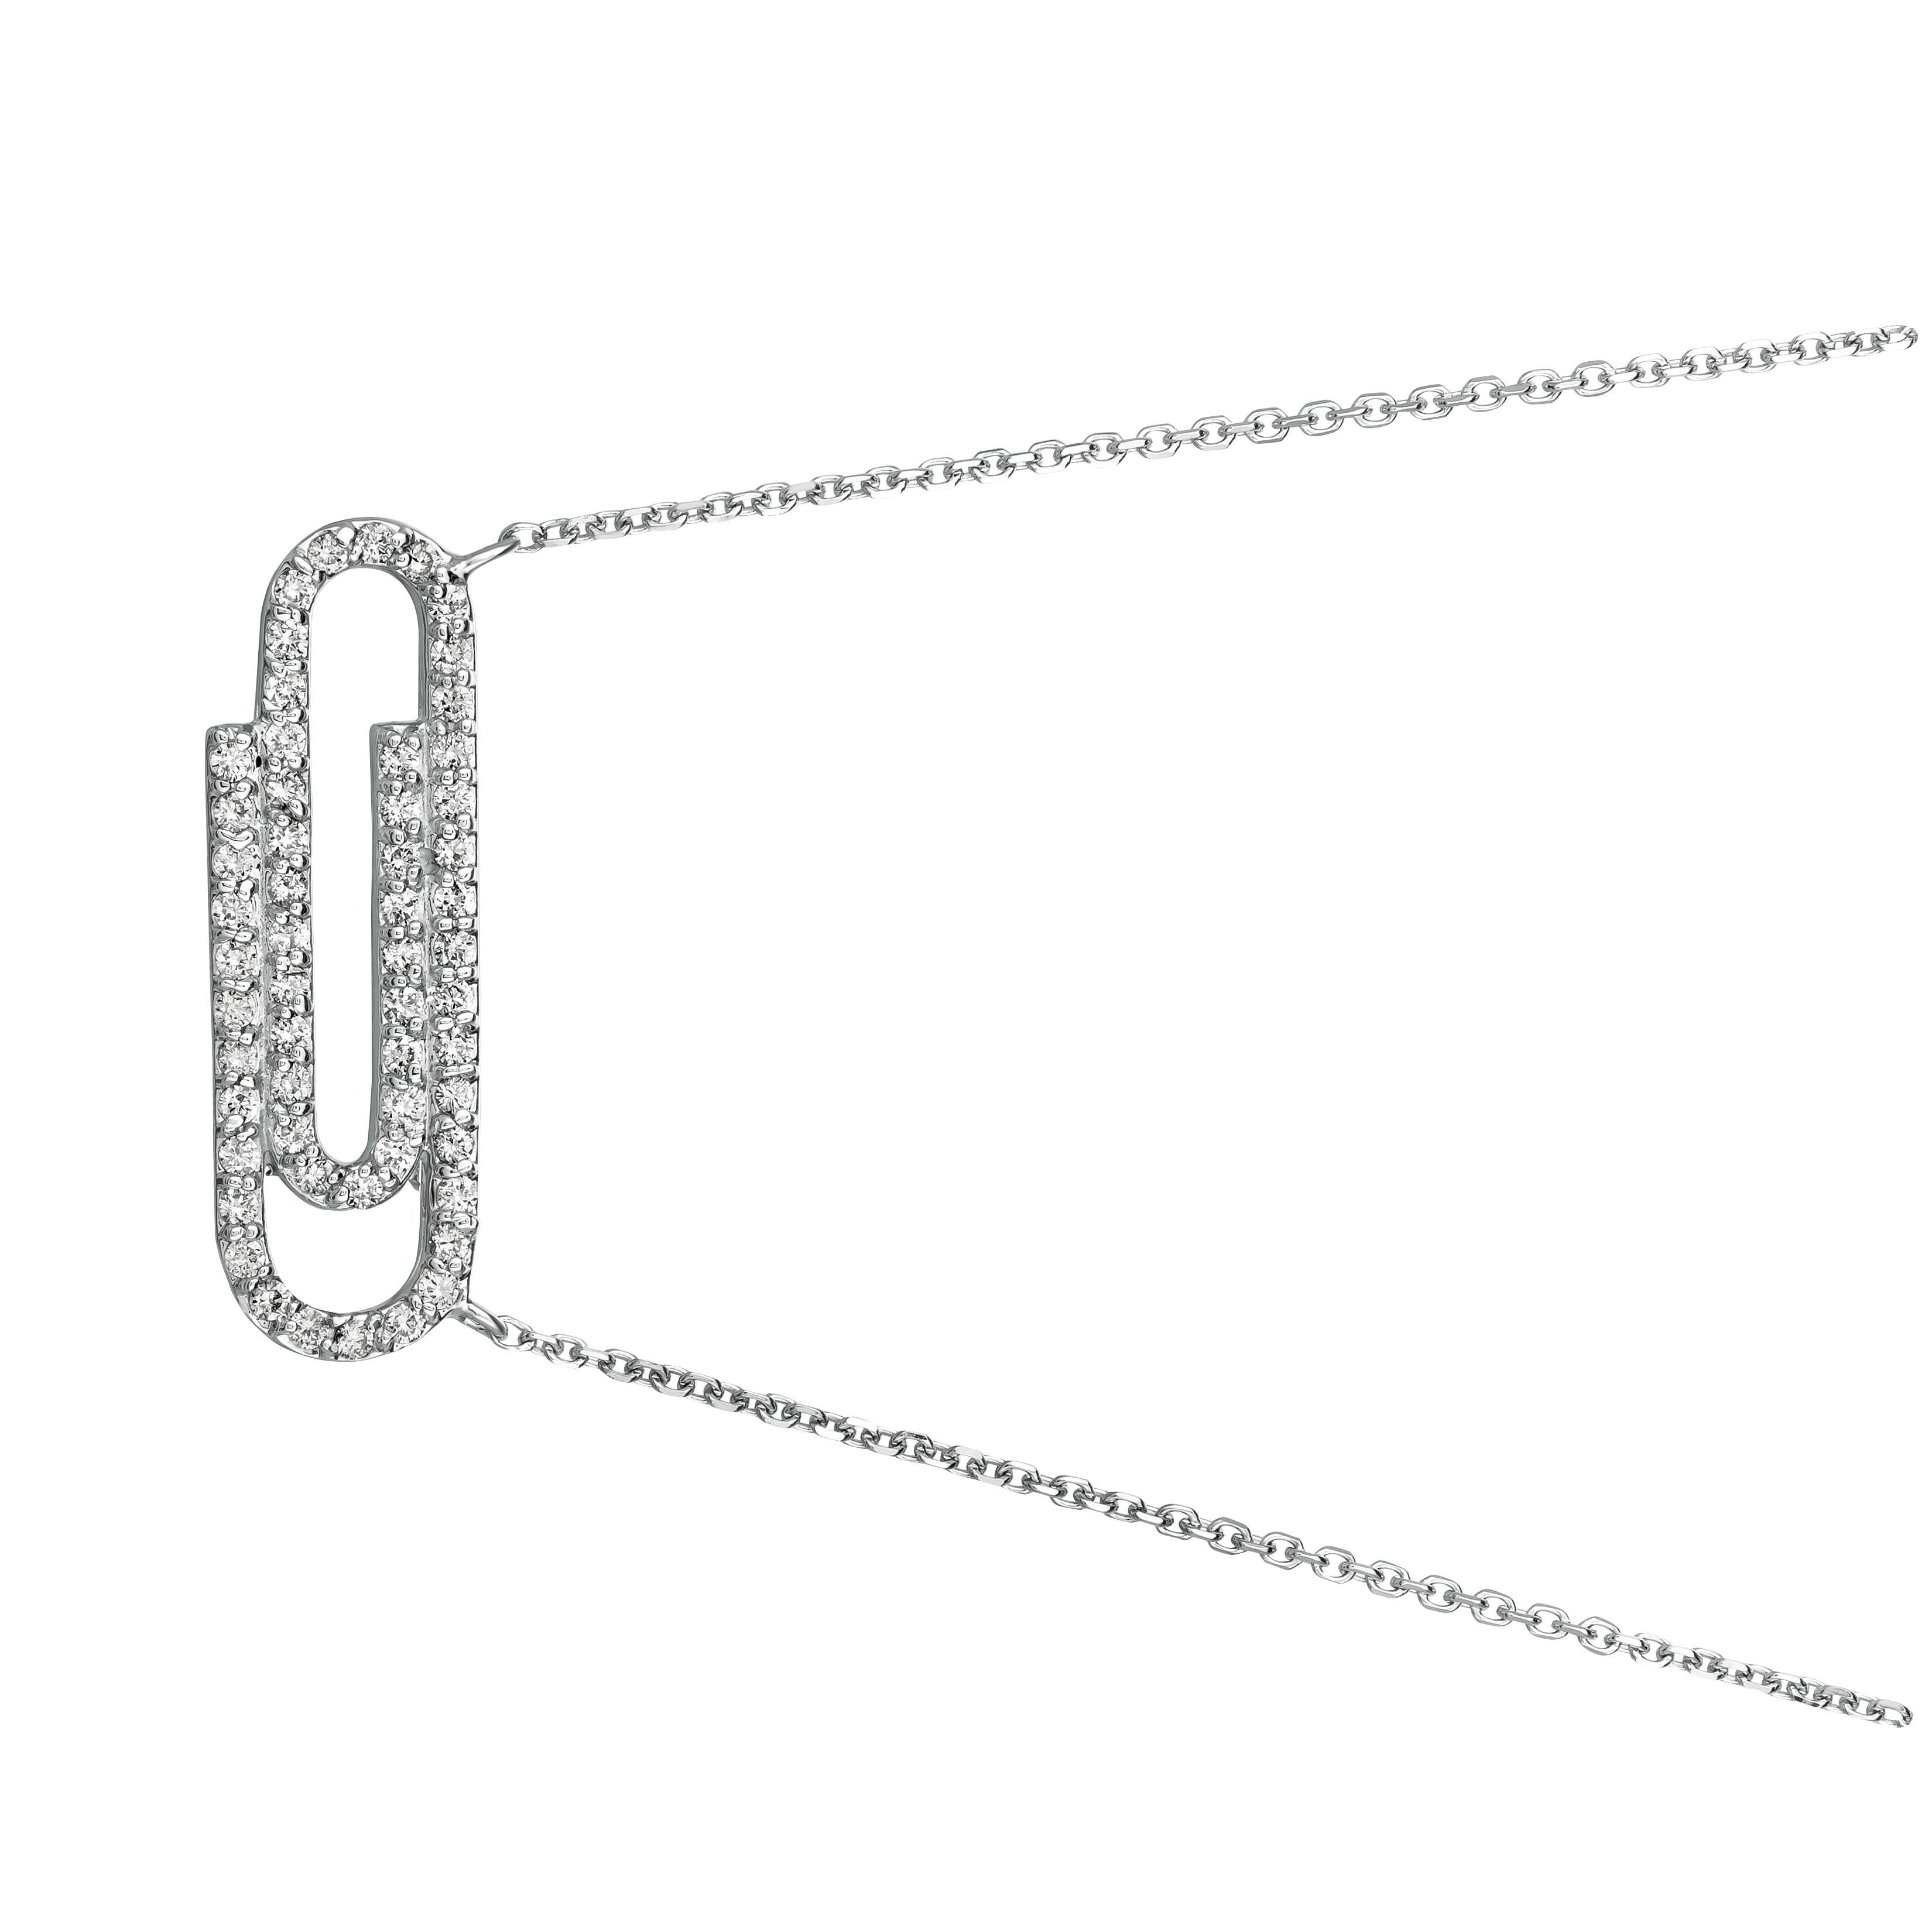 0.40 Carat Natural Diamond Paper Clip Necklace 14K White Gold G SI 18 inches chain

100% Natural Diamonds, Not Enhanced in any way Round Cut Diamond Necklace
0.40CT
G-H
SI
5/16 inch in height, 5/16 inch in width
14K White Gold, Pave style, 3.6